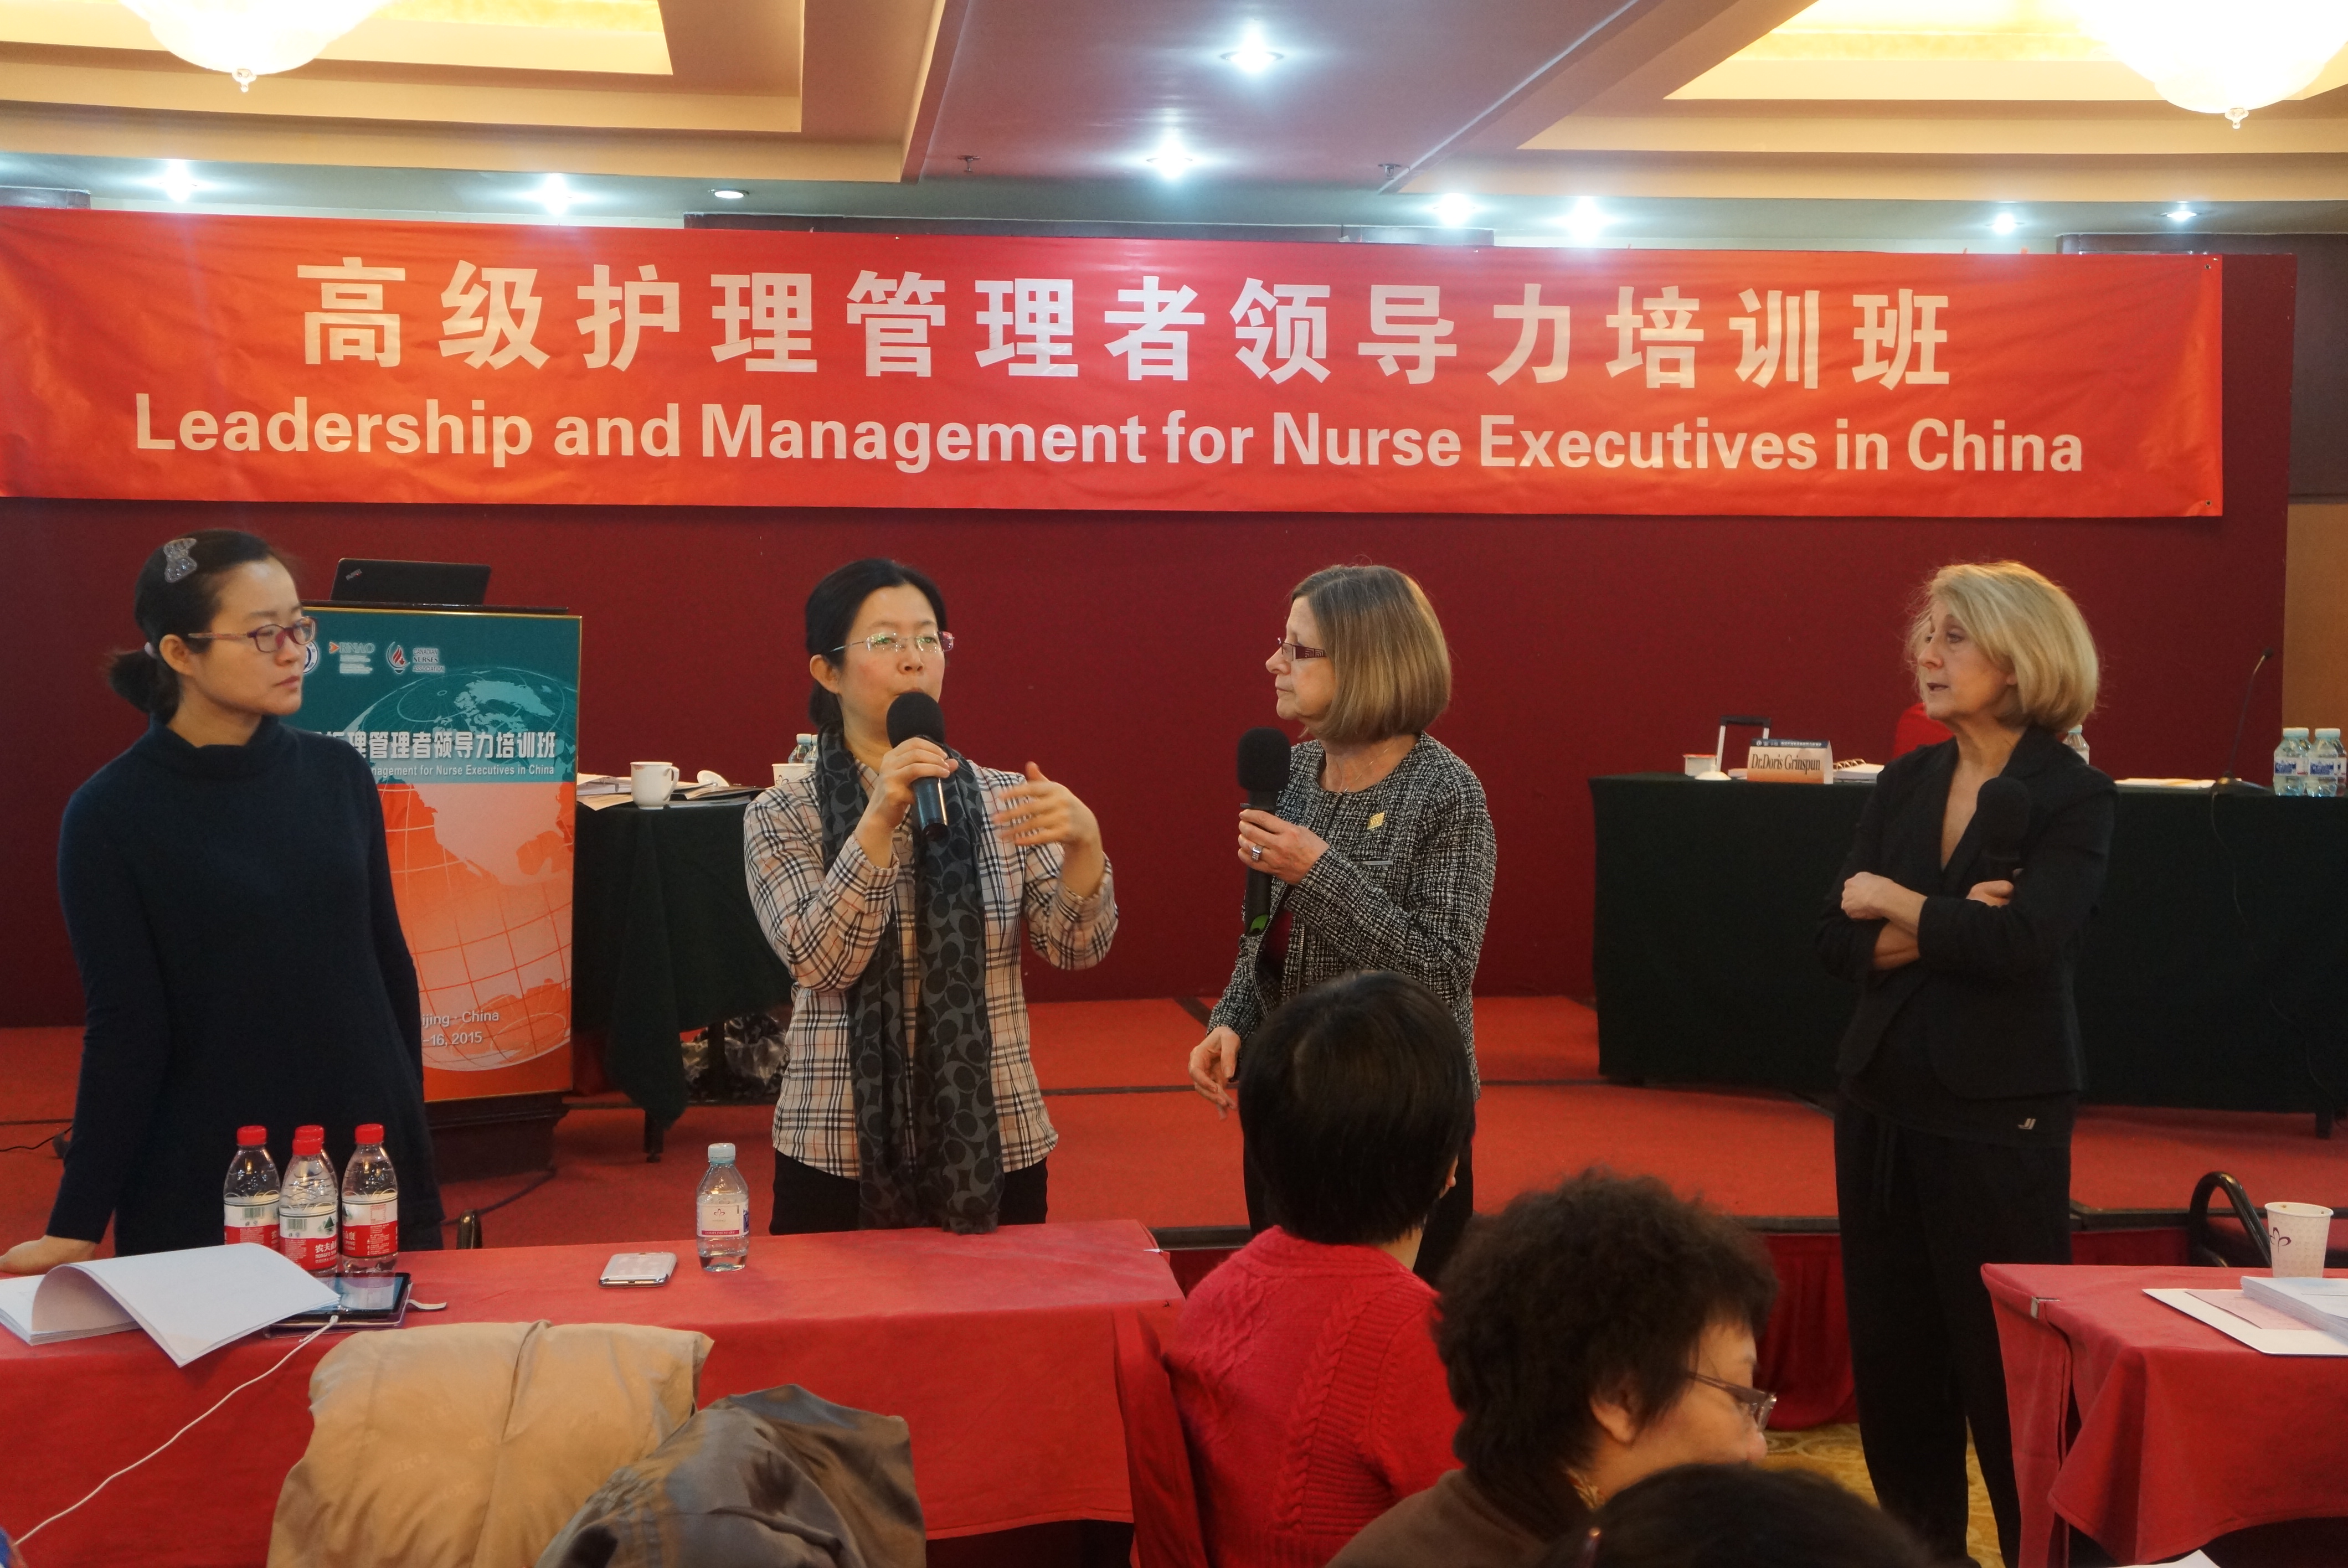 Grinspun (second from right) and Dr. Irmajean Bajnok (right) host leadership training sessions in China.